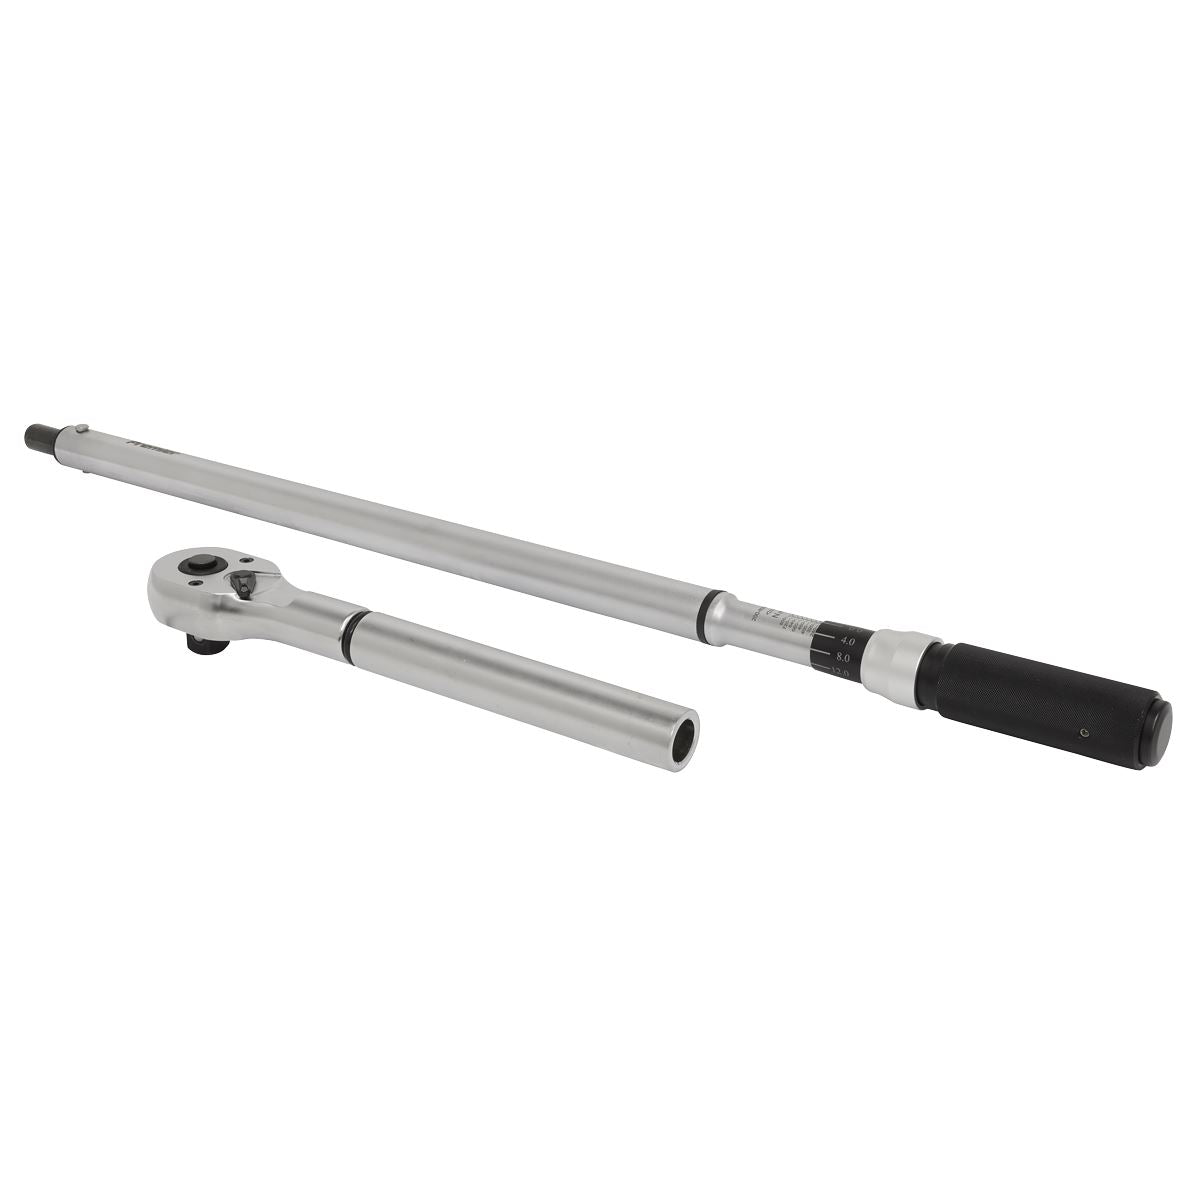 Sealey Premier Torque Wrench Micrometer Style 3/4"Sq Drive 160-800Nm - Calibrated